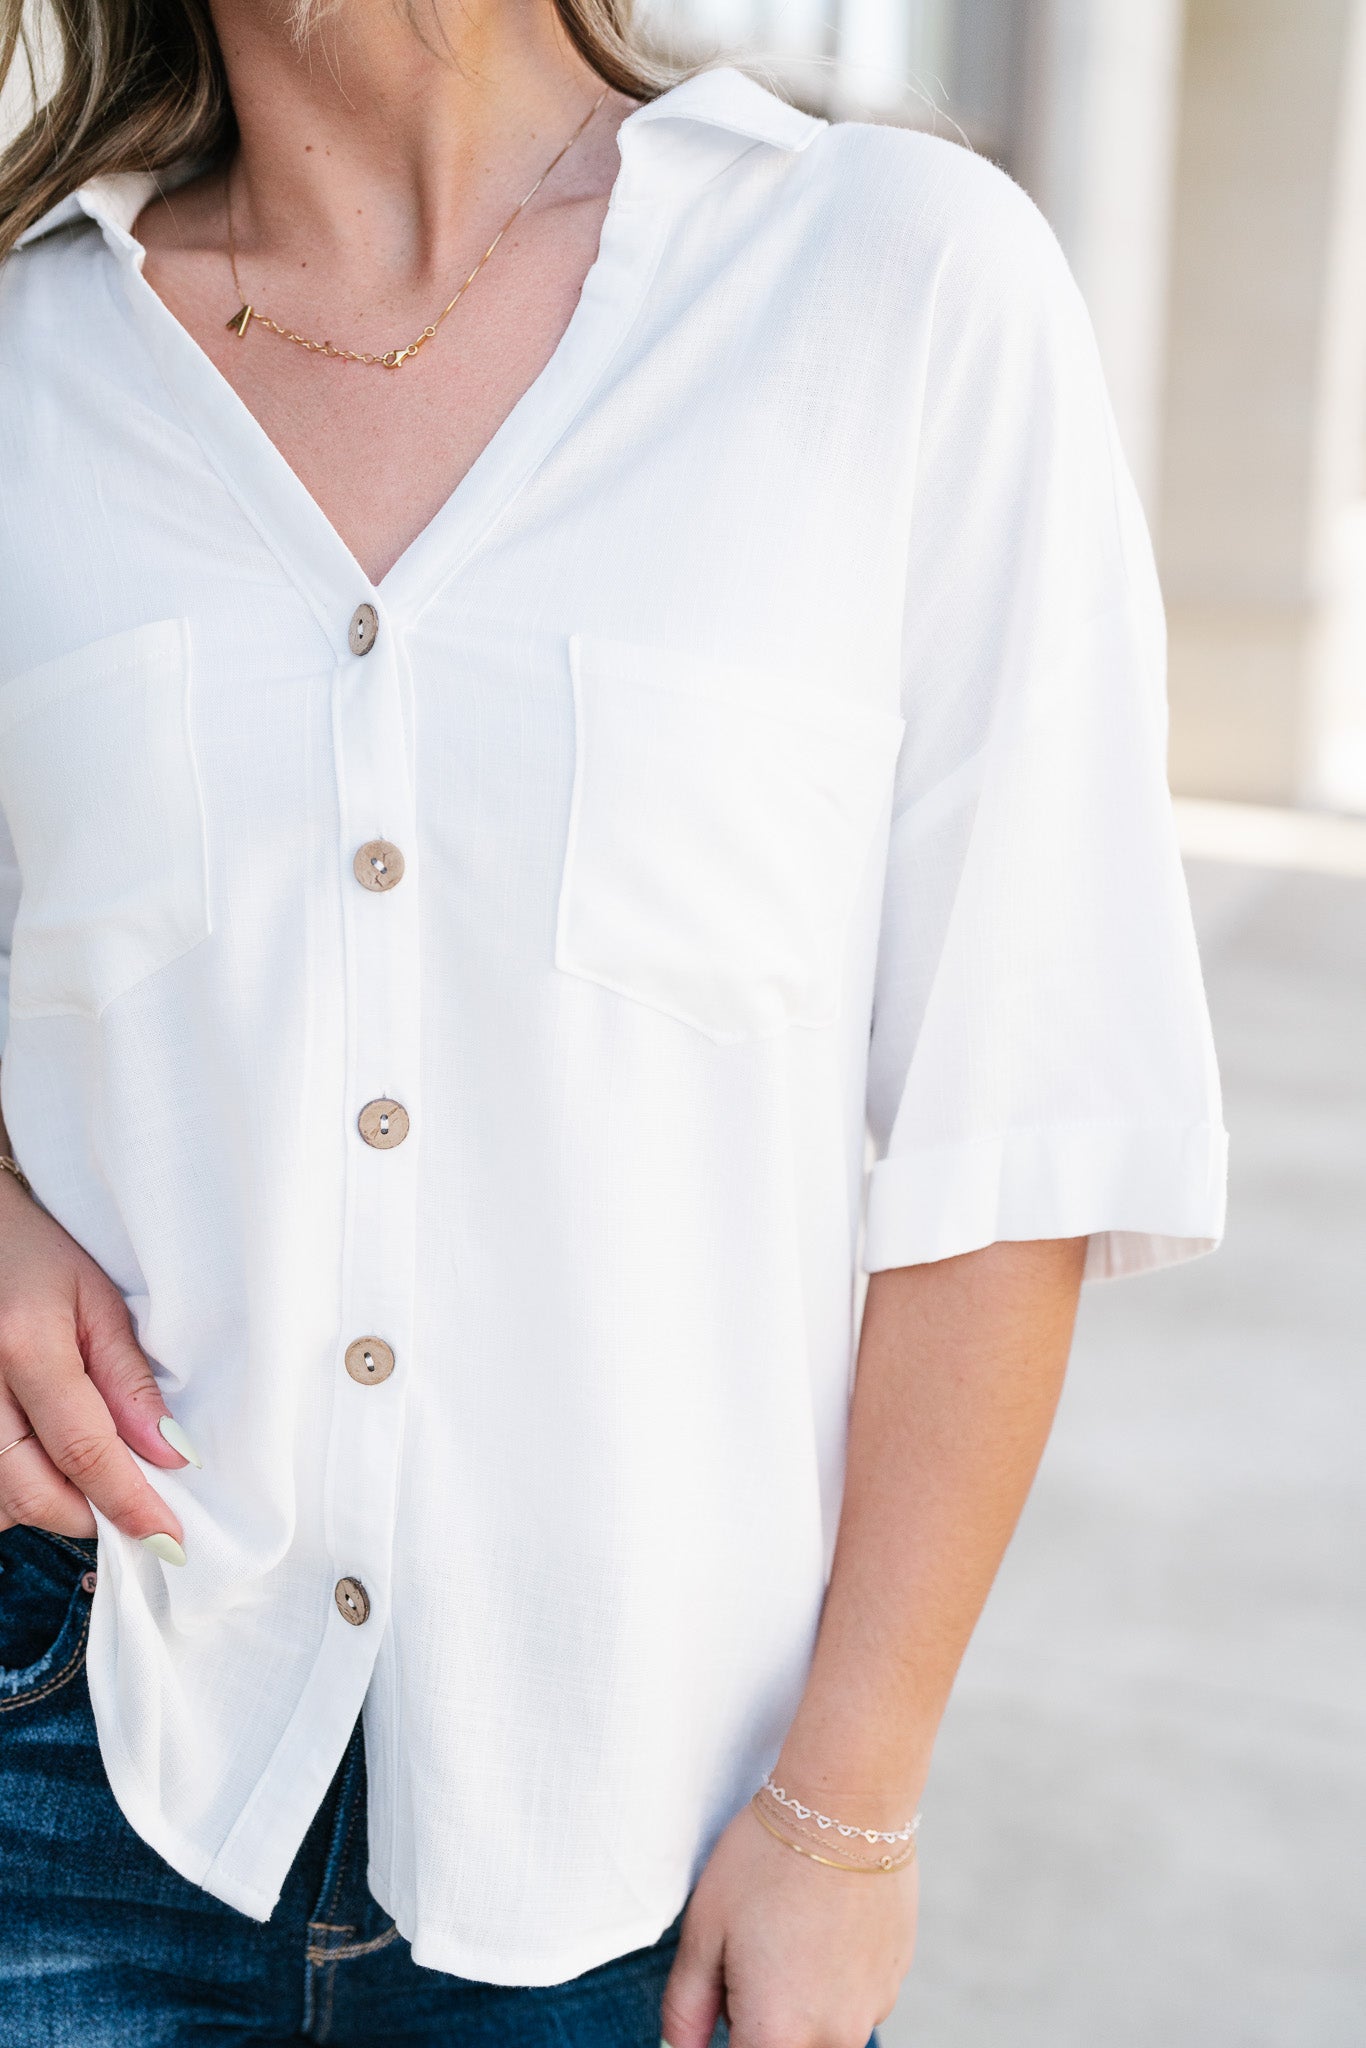 Simply White Button Up